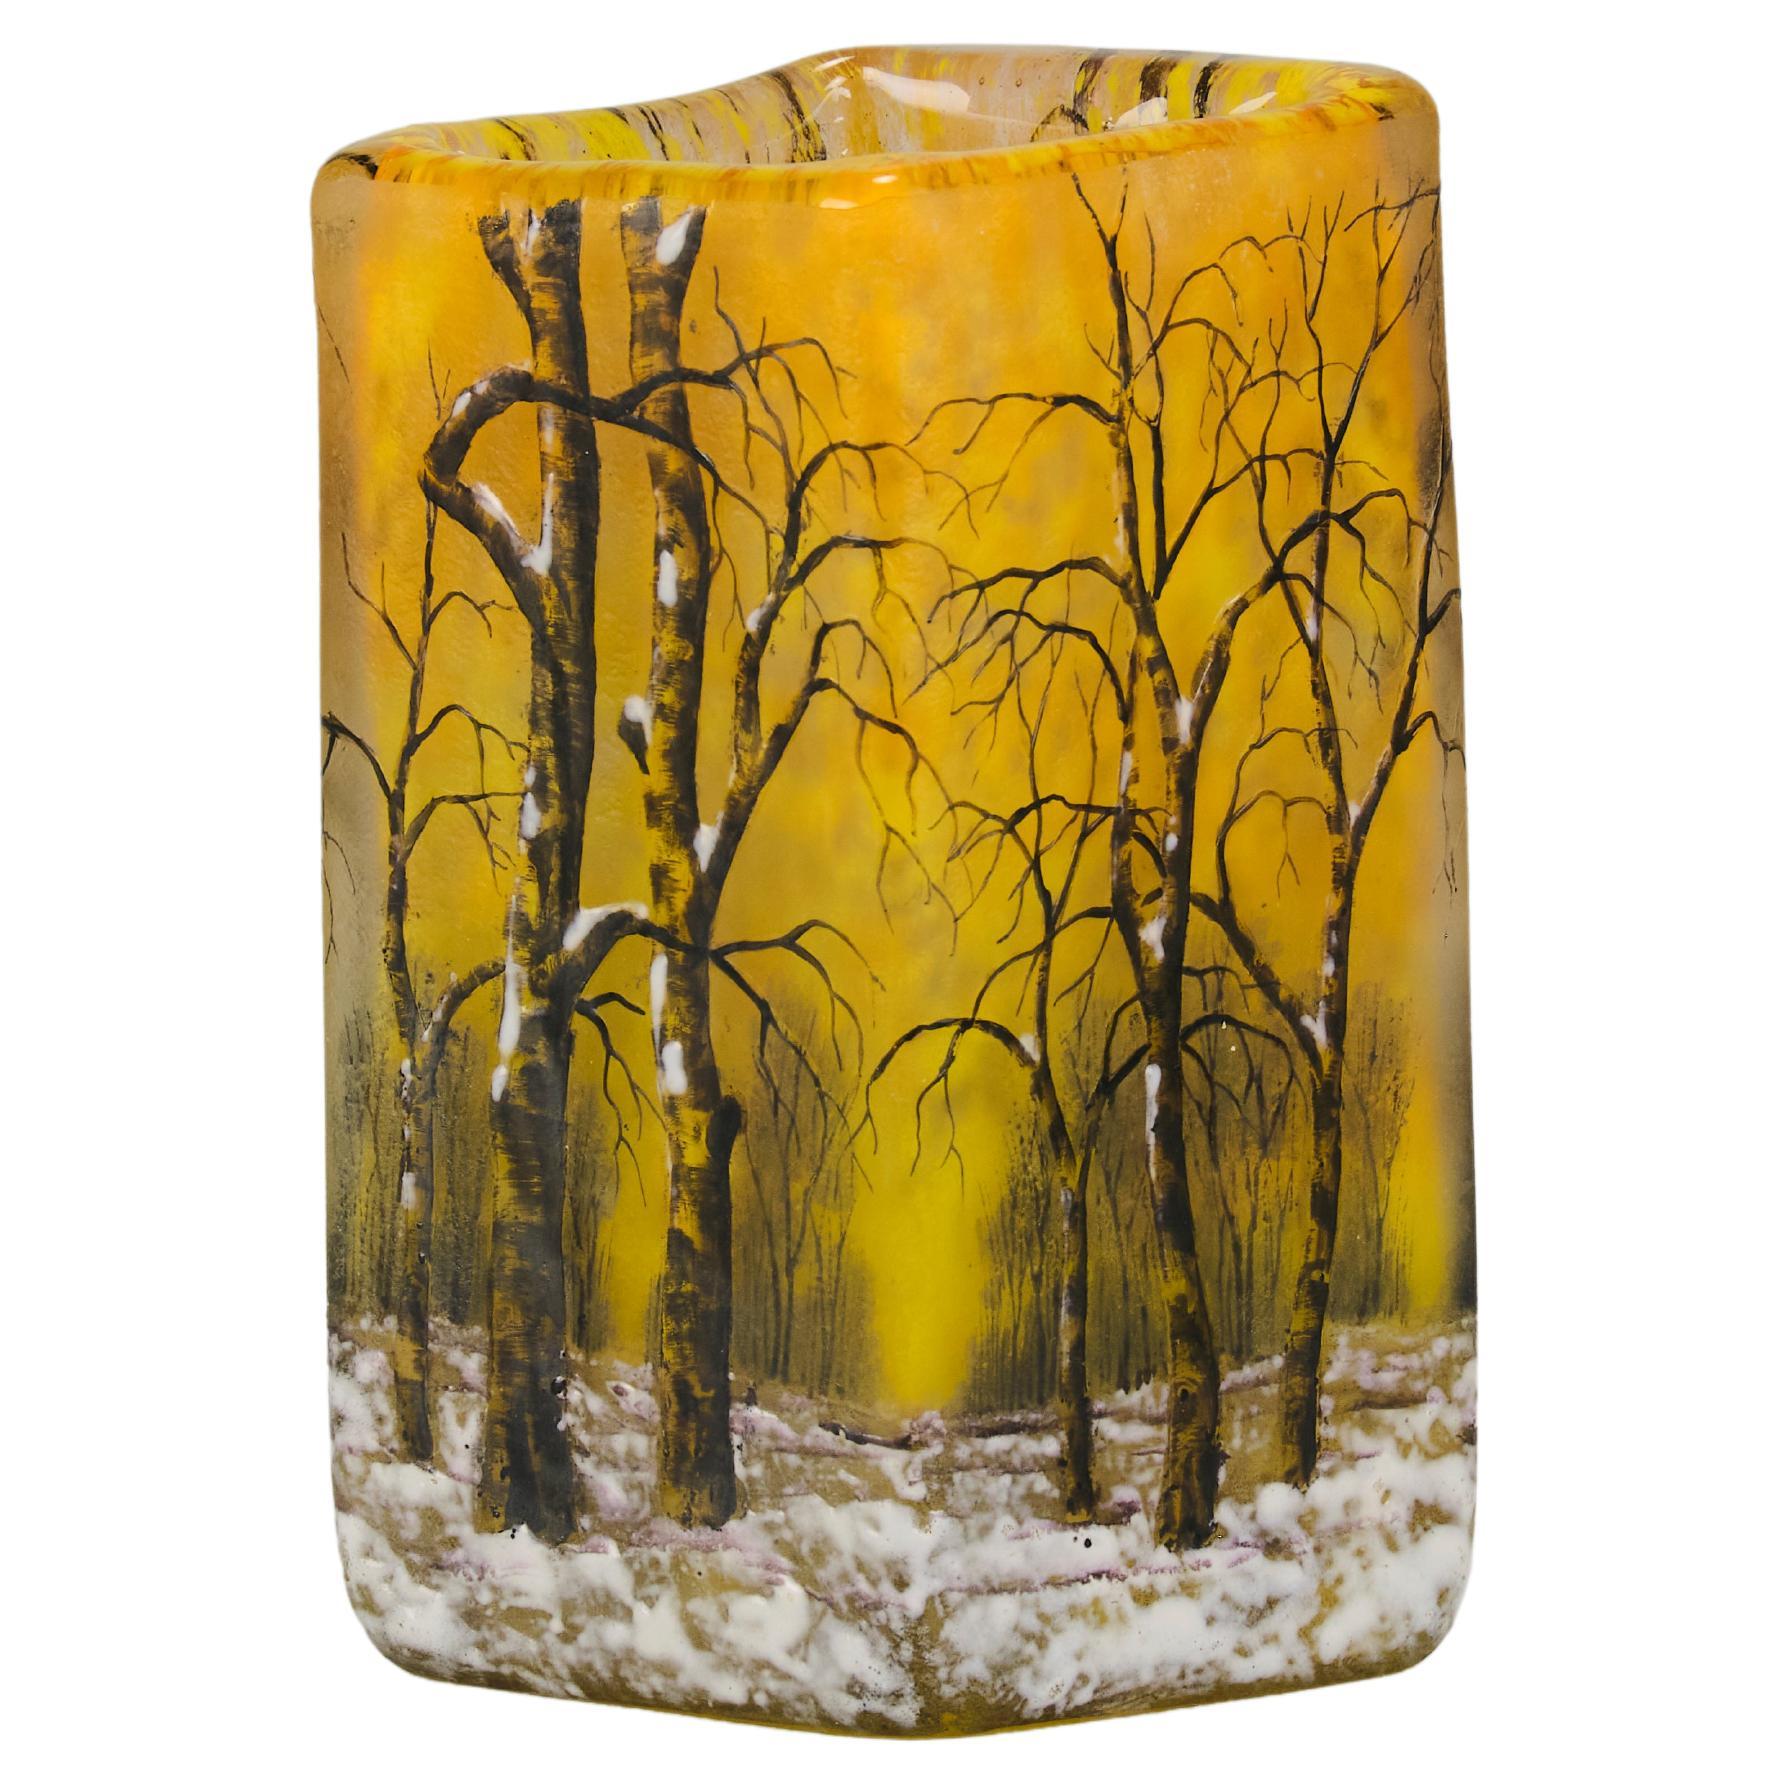 Early 20th Century Vase Entitled "Winter Vase" by Daum Frères Circa 1900 For Sale